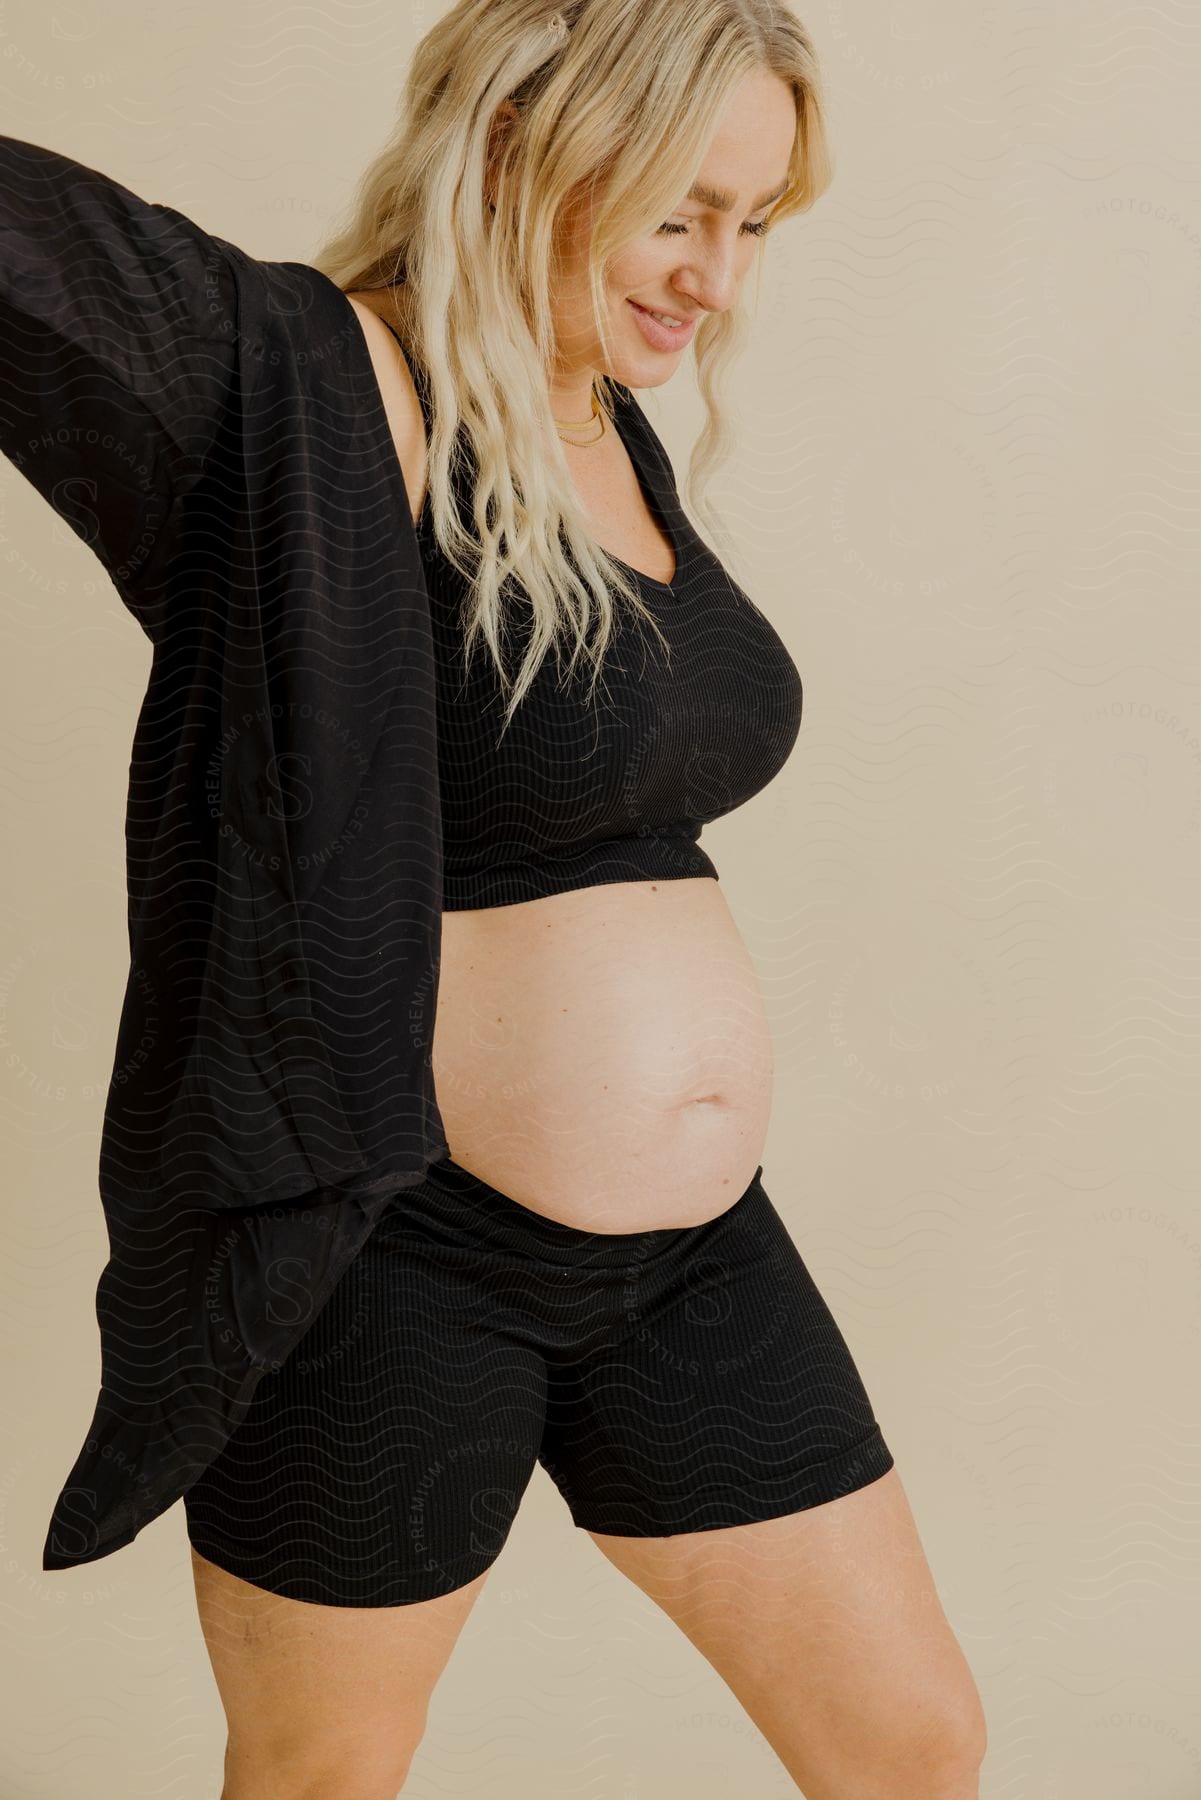 blonde pregnant woman wearing black clothes that reveal her belly standing indoors next to a white wall